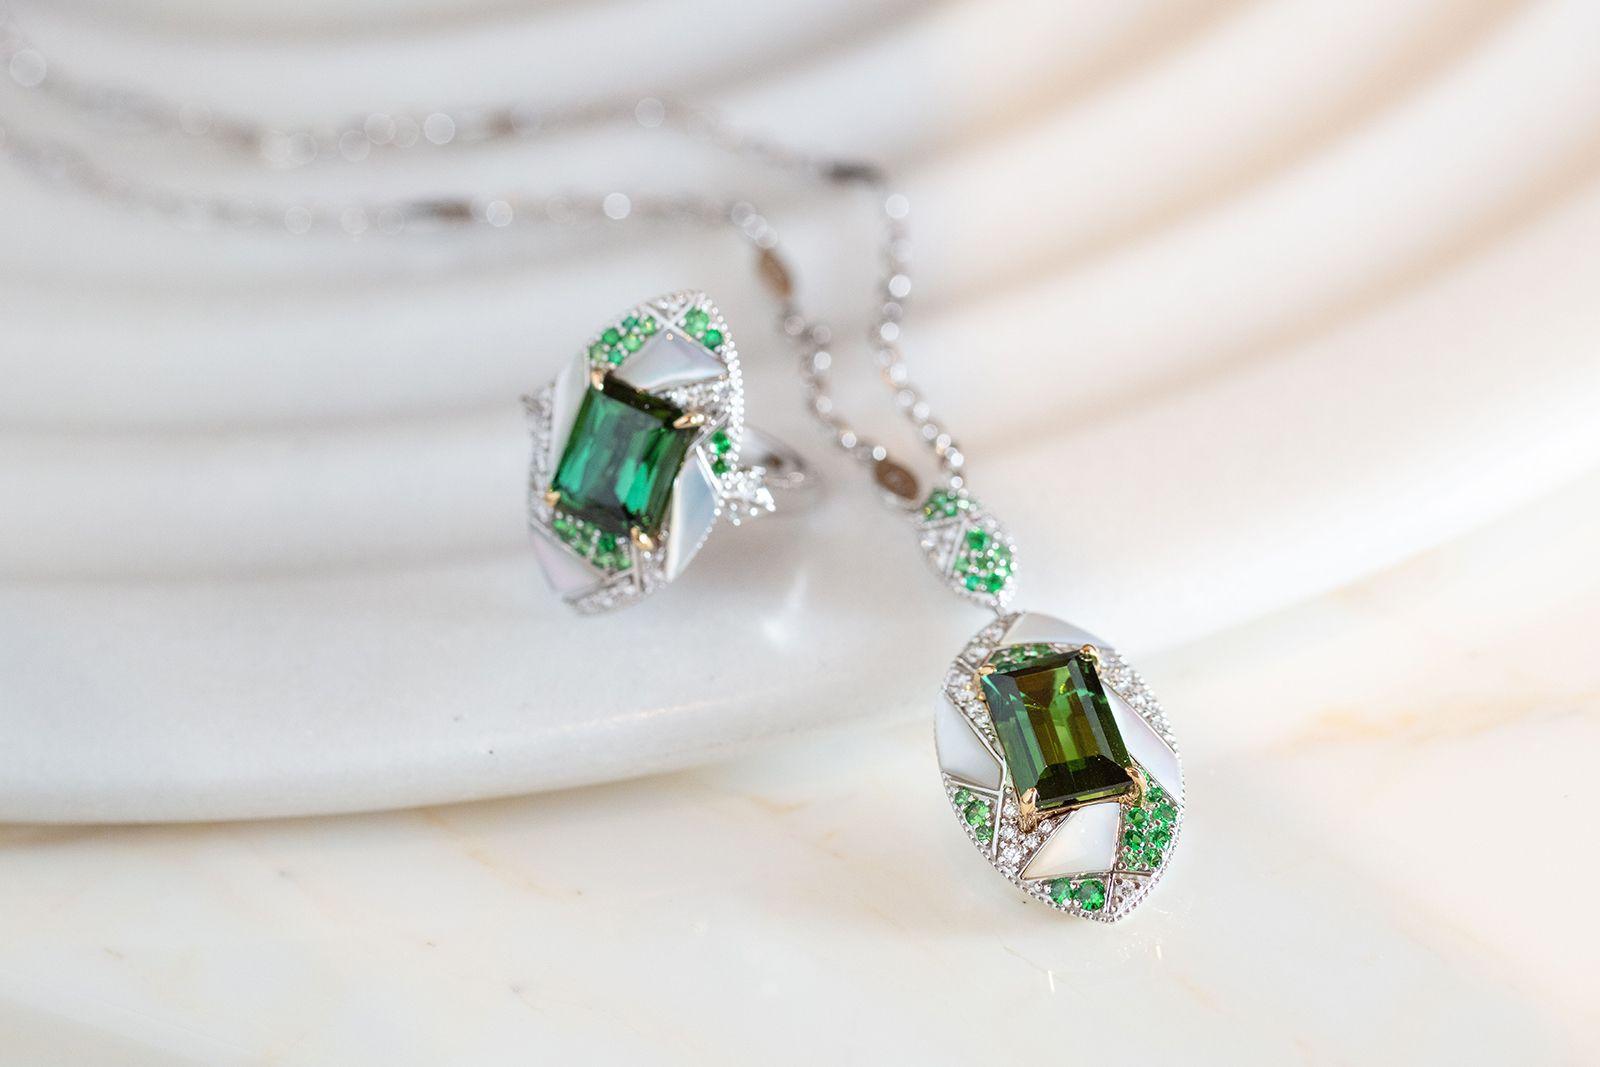 Mystic Green Tourmalines centred on an irregular frame of Tsavorites, Mother of Pearl and Diamonds. Combined with subtle gold detailing the tourmalines are hypnotising with its deep green hue.

Mystic Green Tourmaline Necklace with Tsavorites,